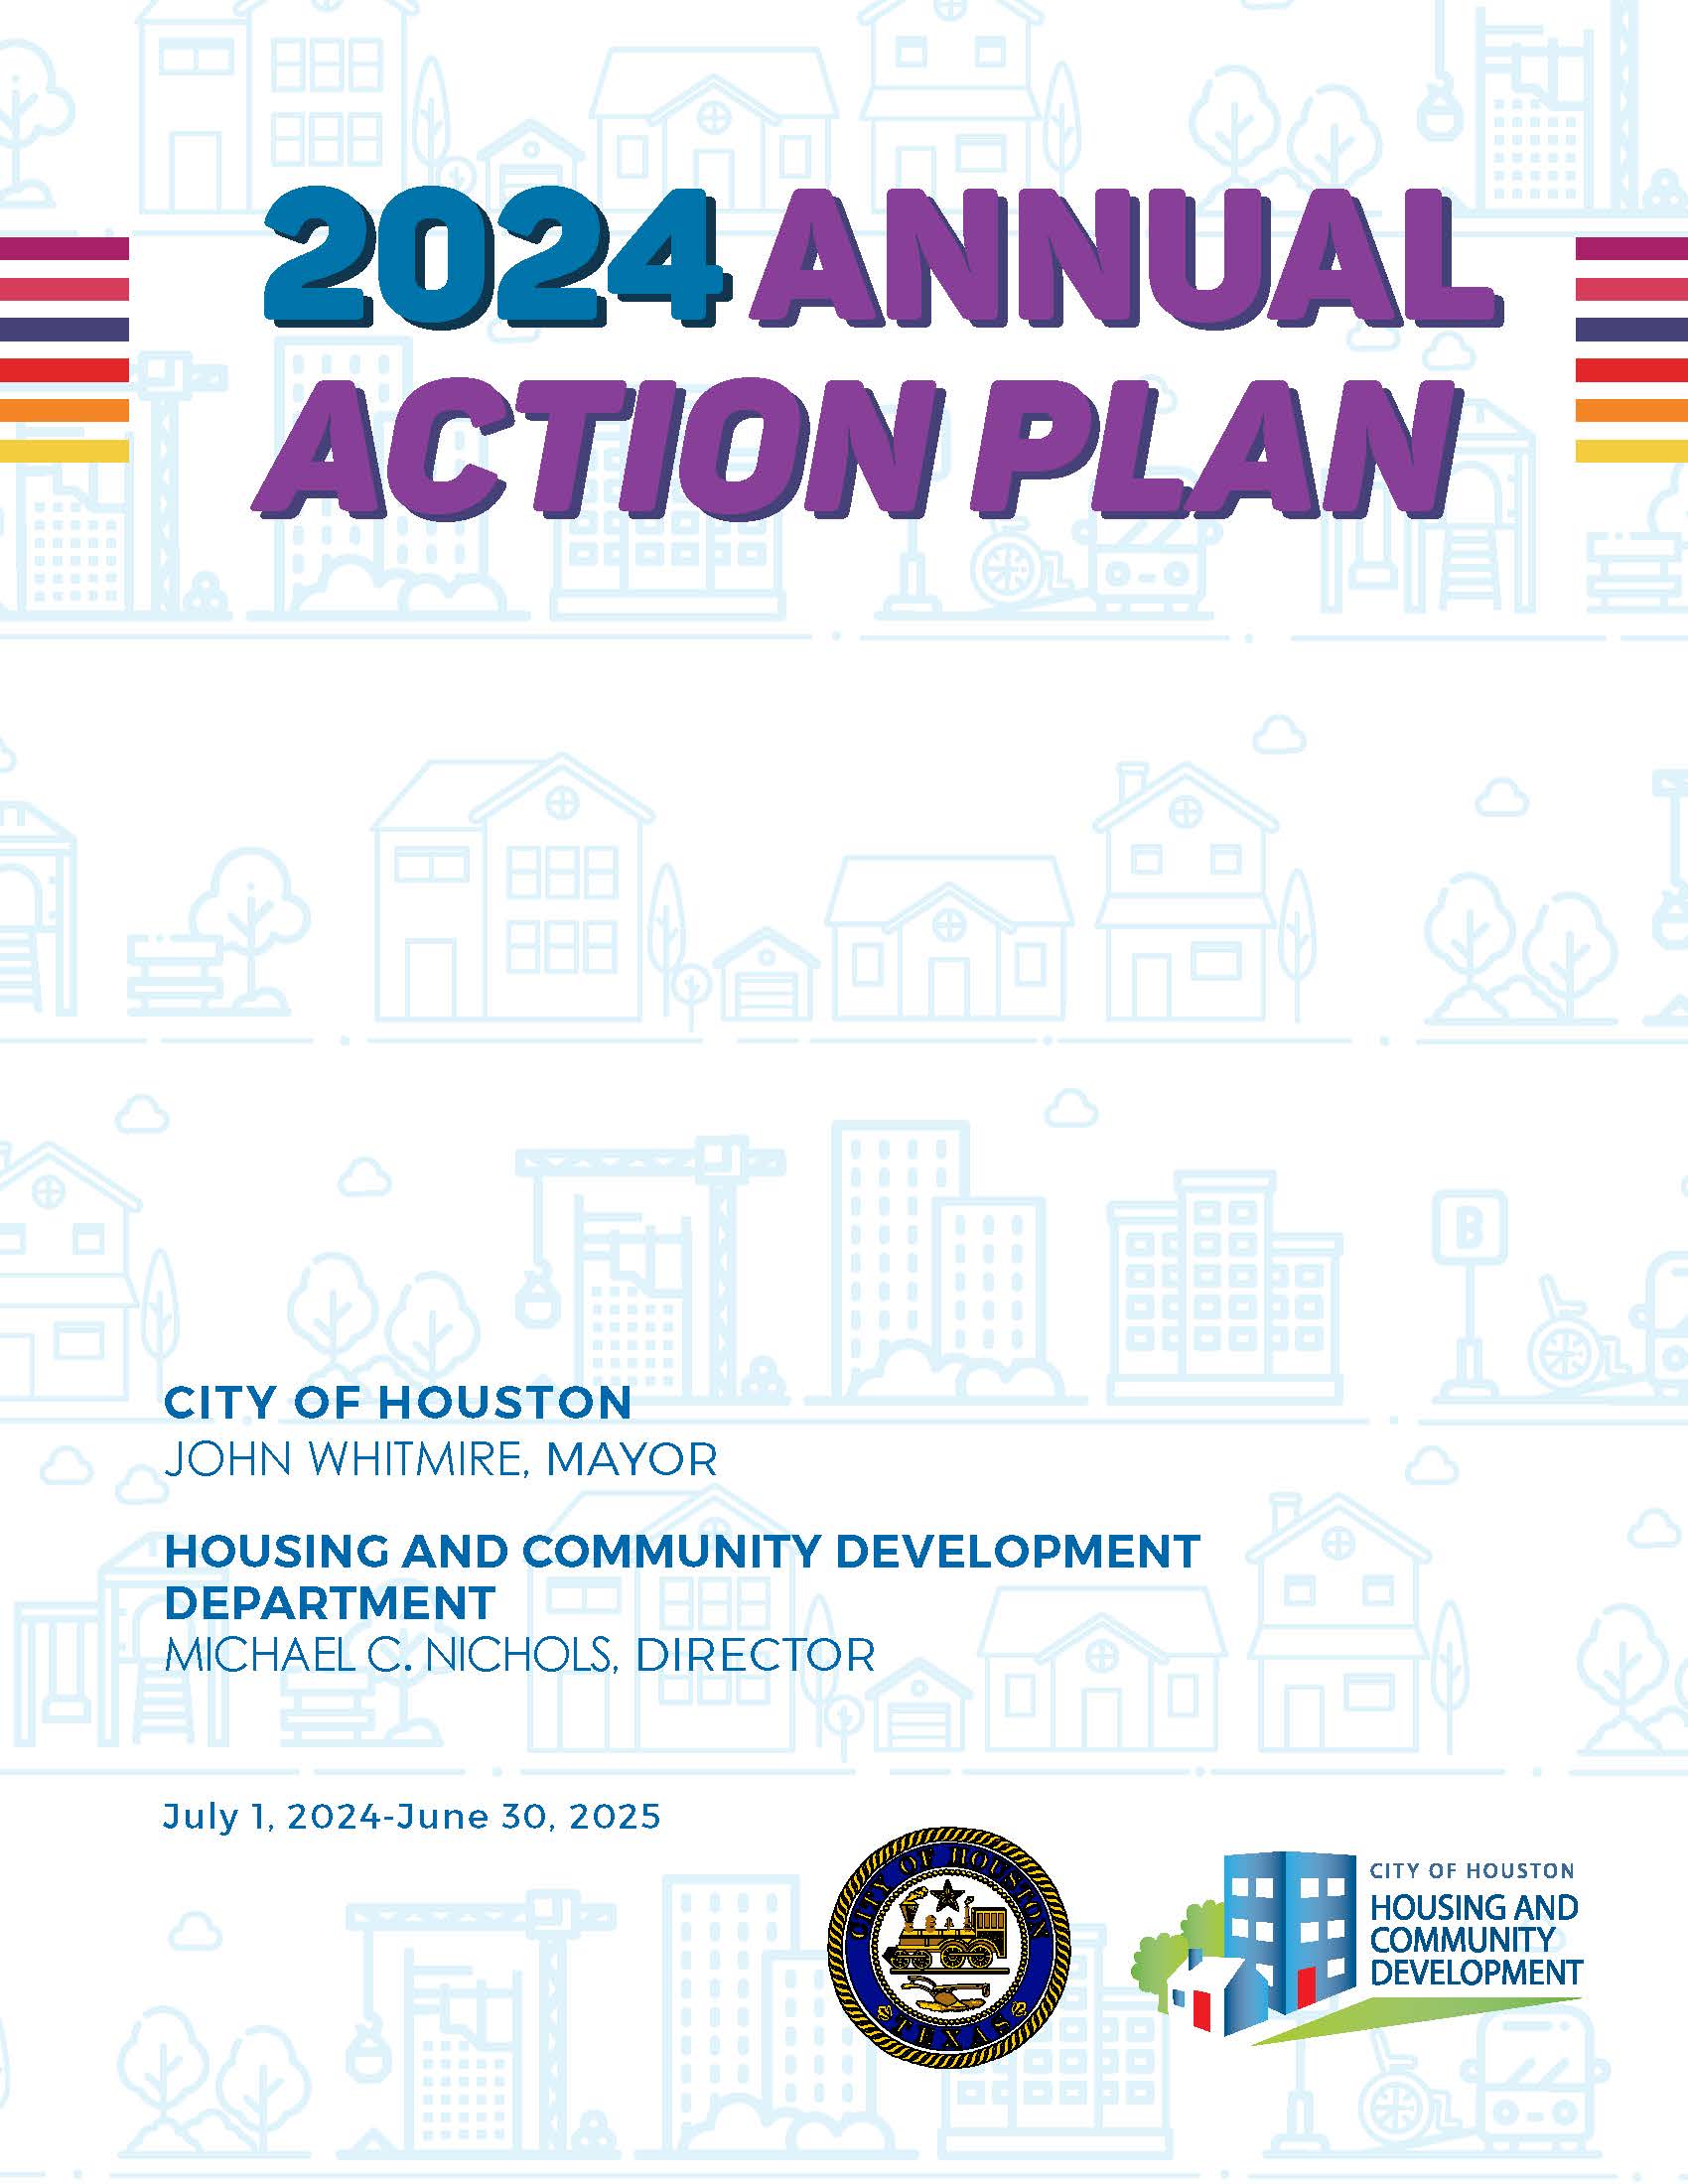 Annual Action Plan for 2024